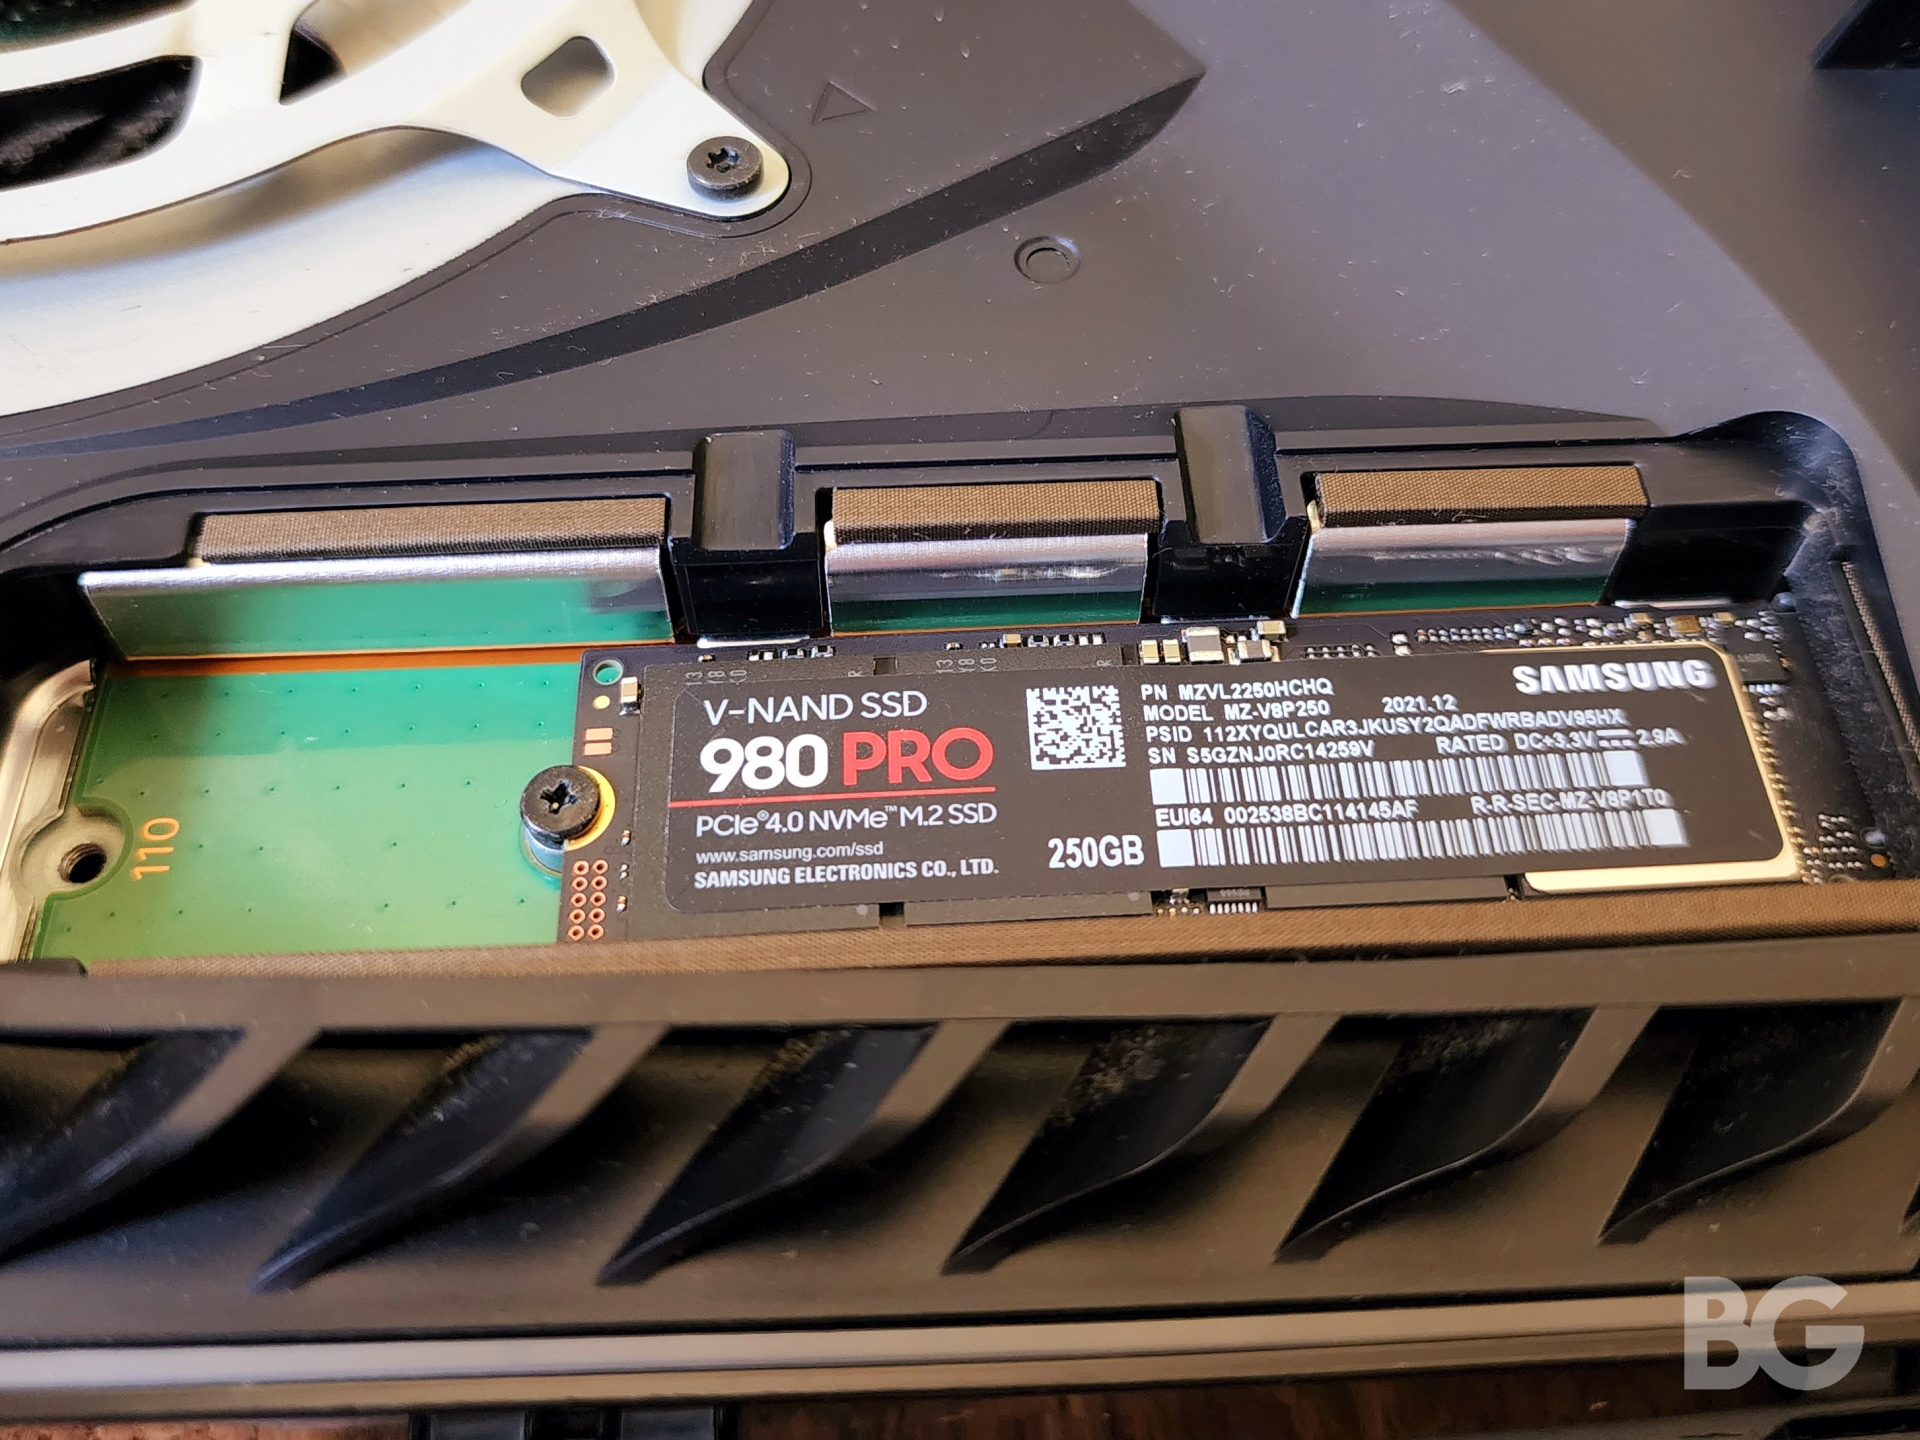 Samsung 980 Pro PS5 SSD Expansion Test – NAS Compares